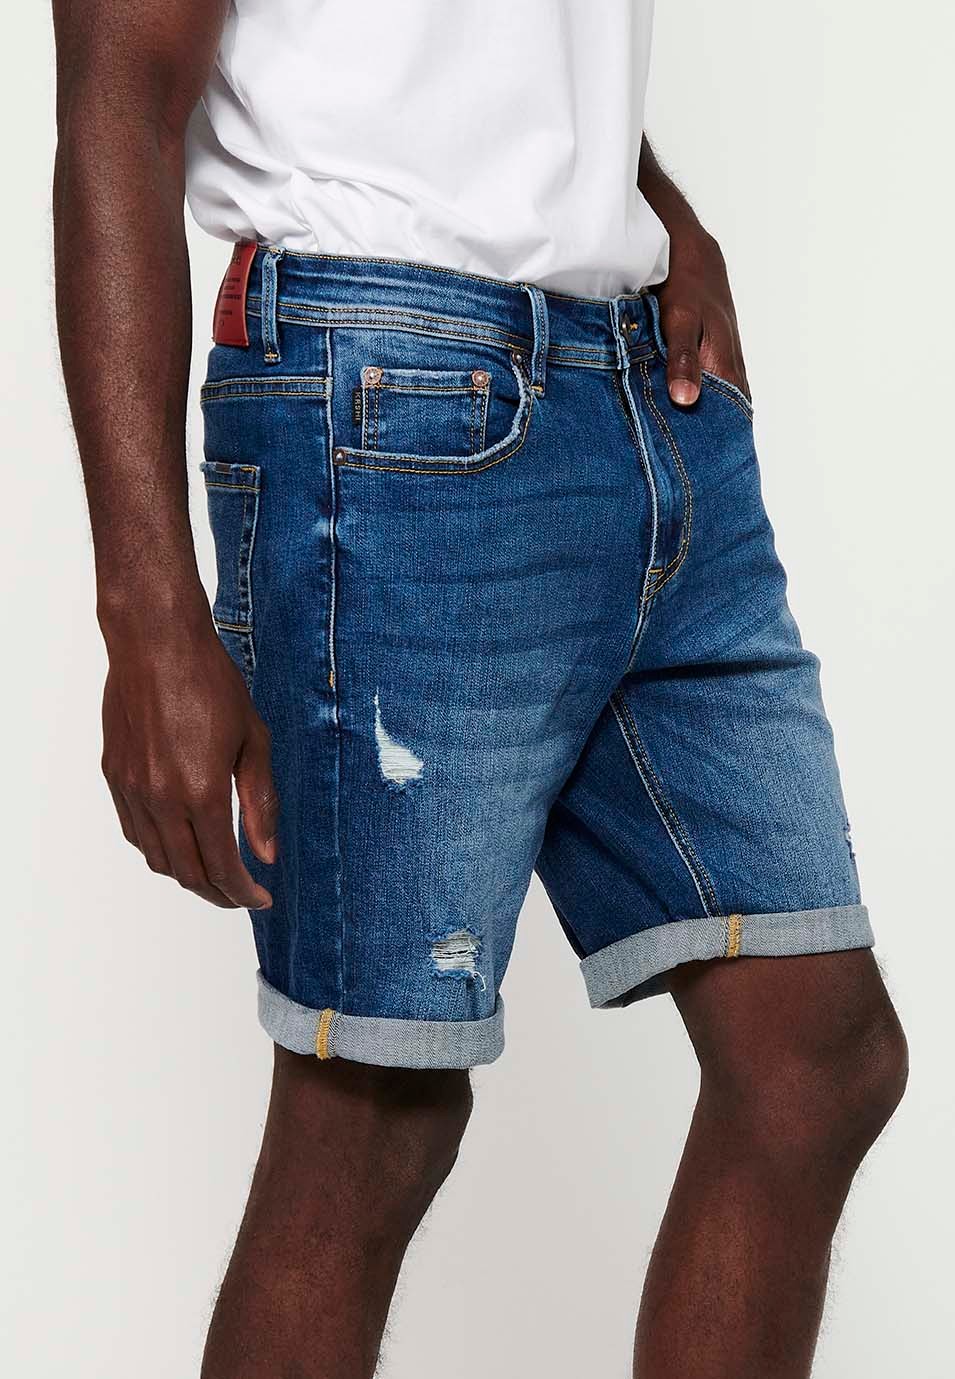 Shorts with turn-up finish and front zipper and button closure with five pockets, one blue pocket pocket for Men 3